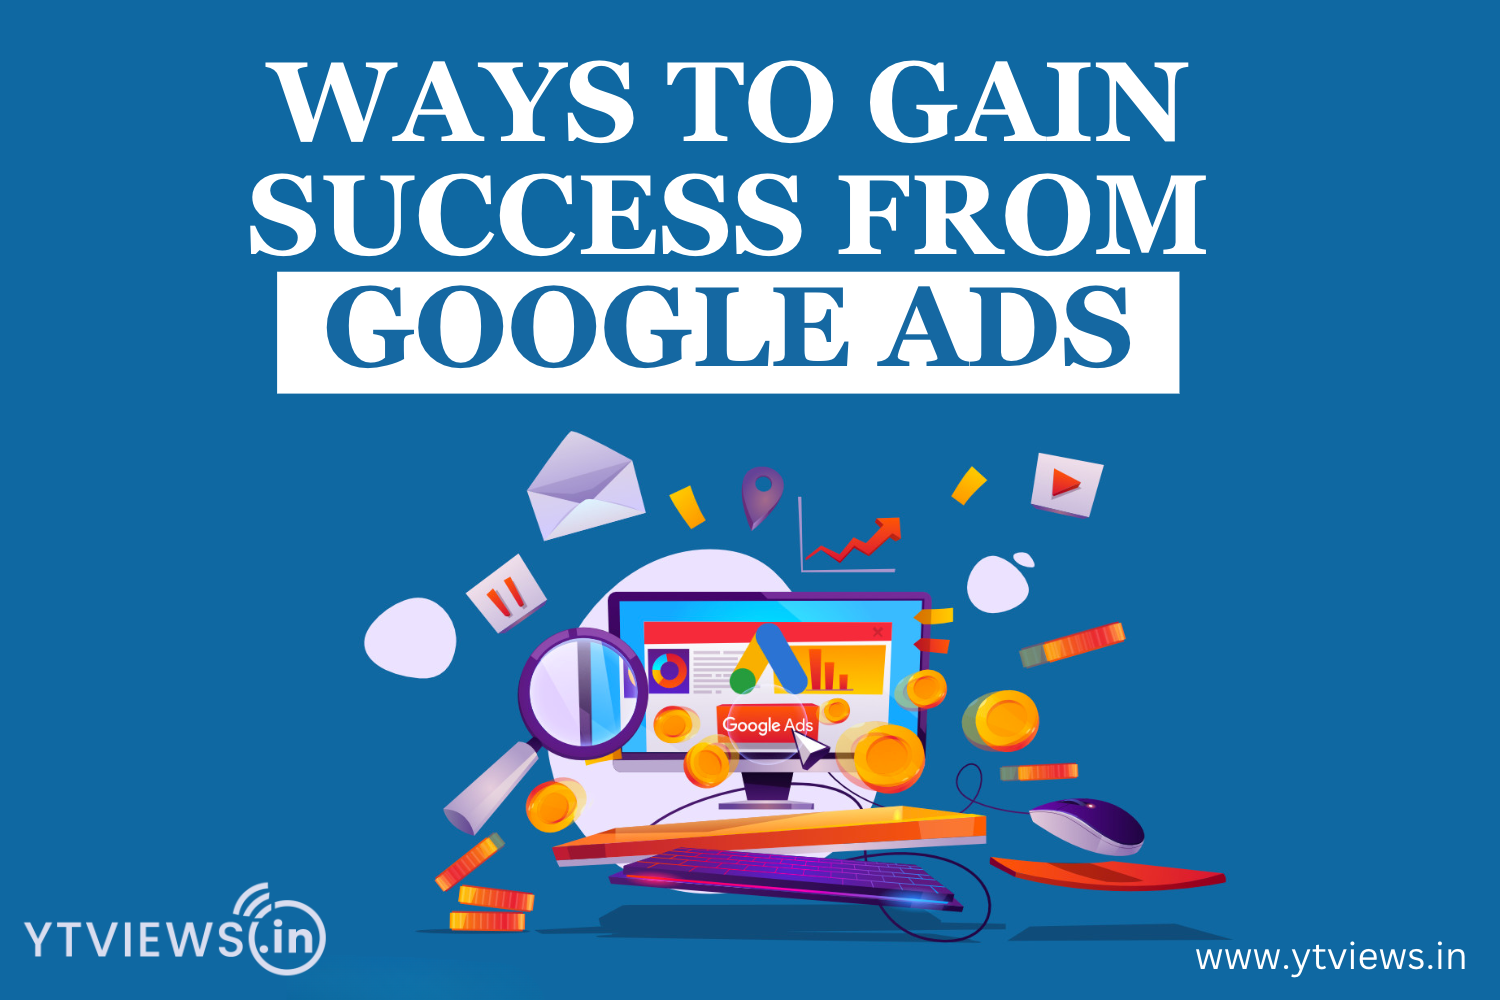 Ways to gain success from Google Ads